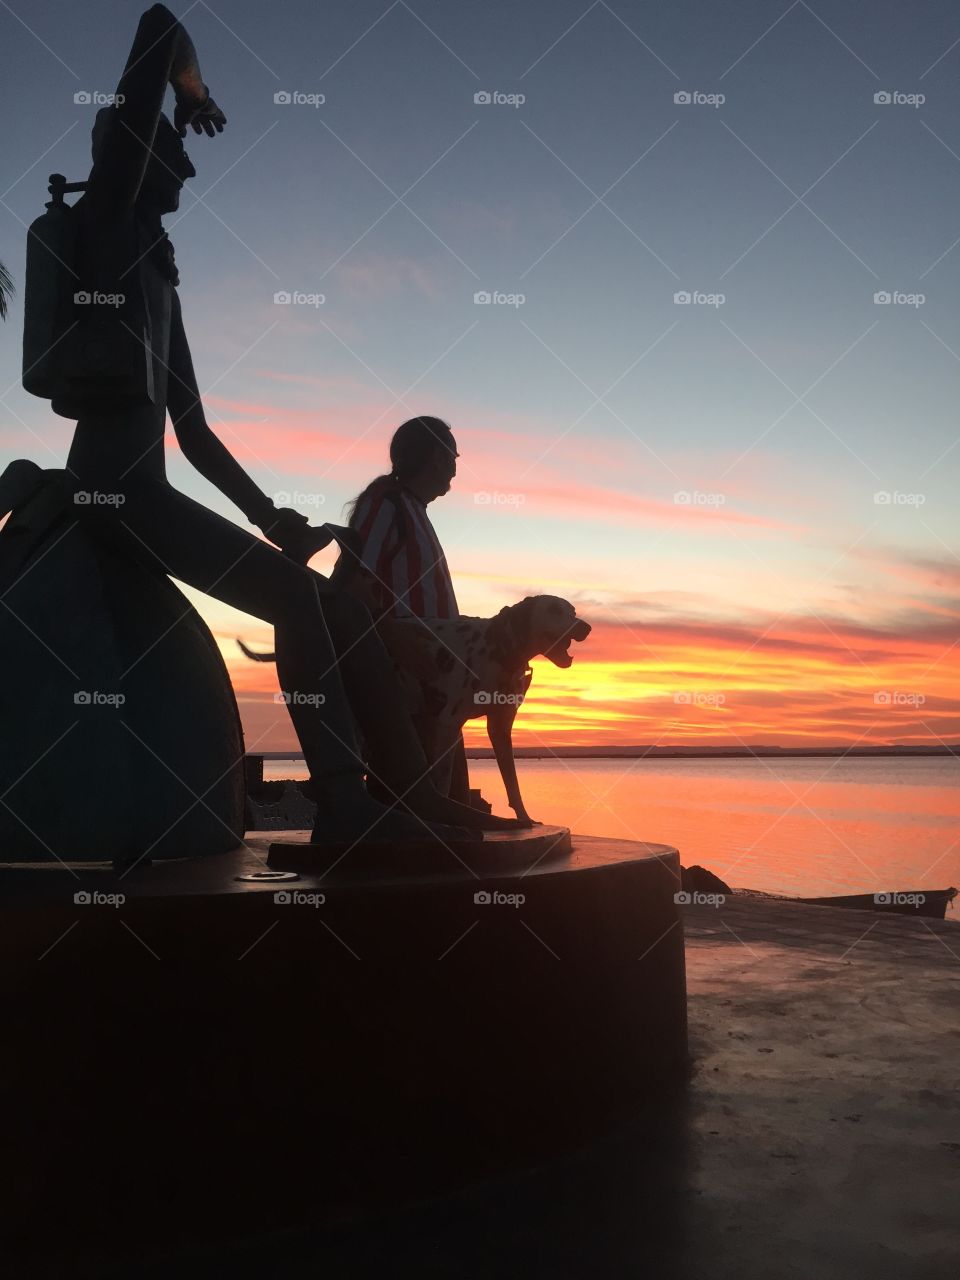 Man and dog silhouetted at sunset at statue on the malecon (sidewalk along the bay)